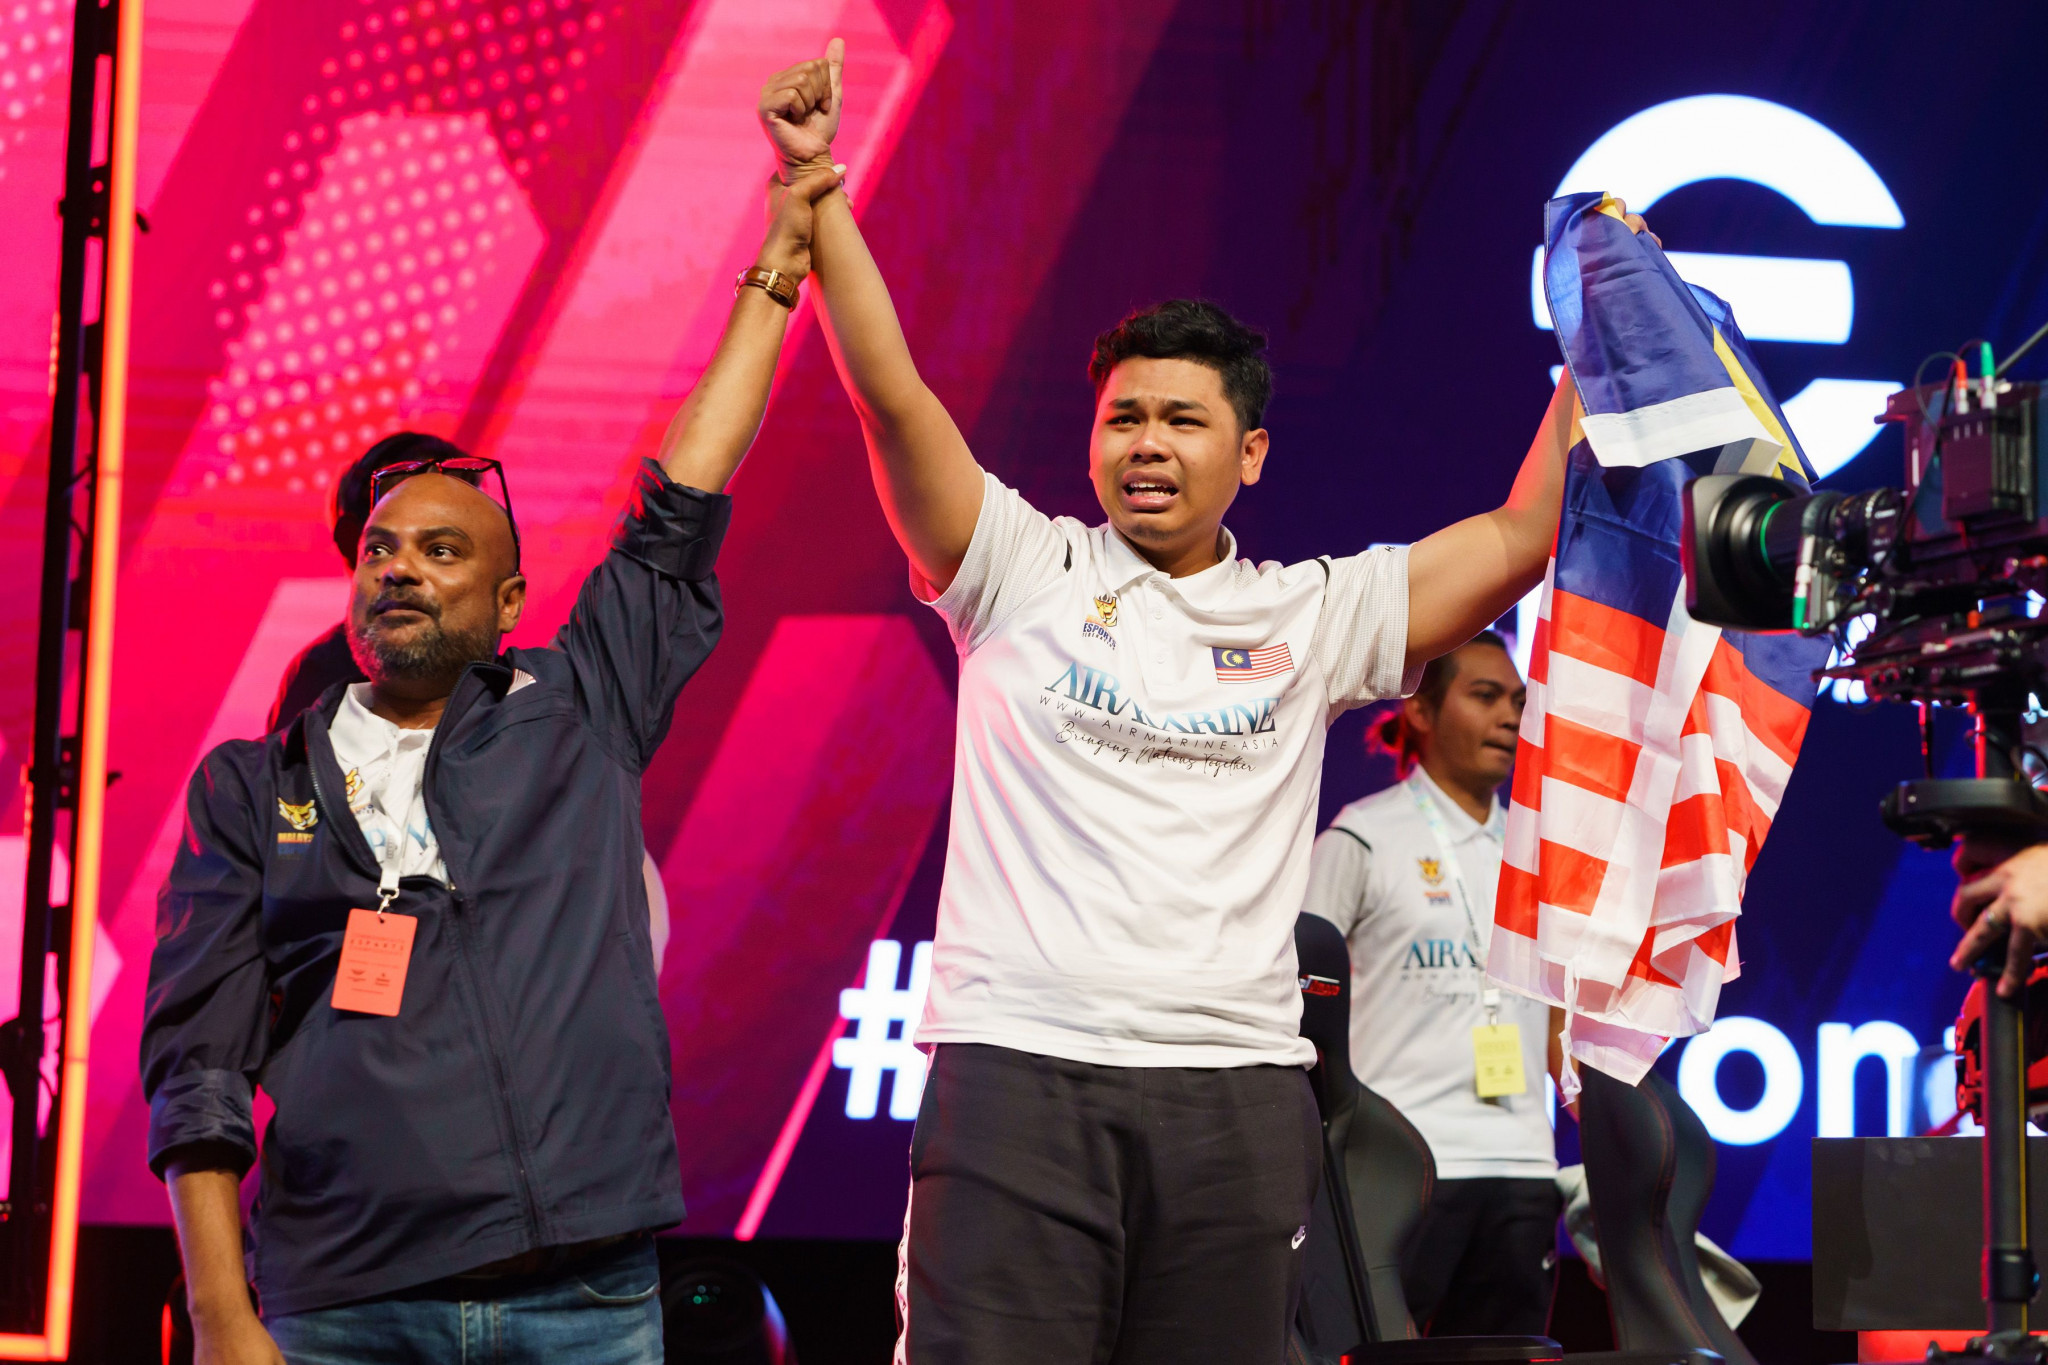 Malaysia shine on first day of Commonwealth Esports Championships in Birmingham